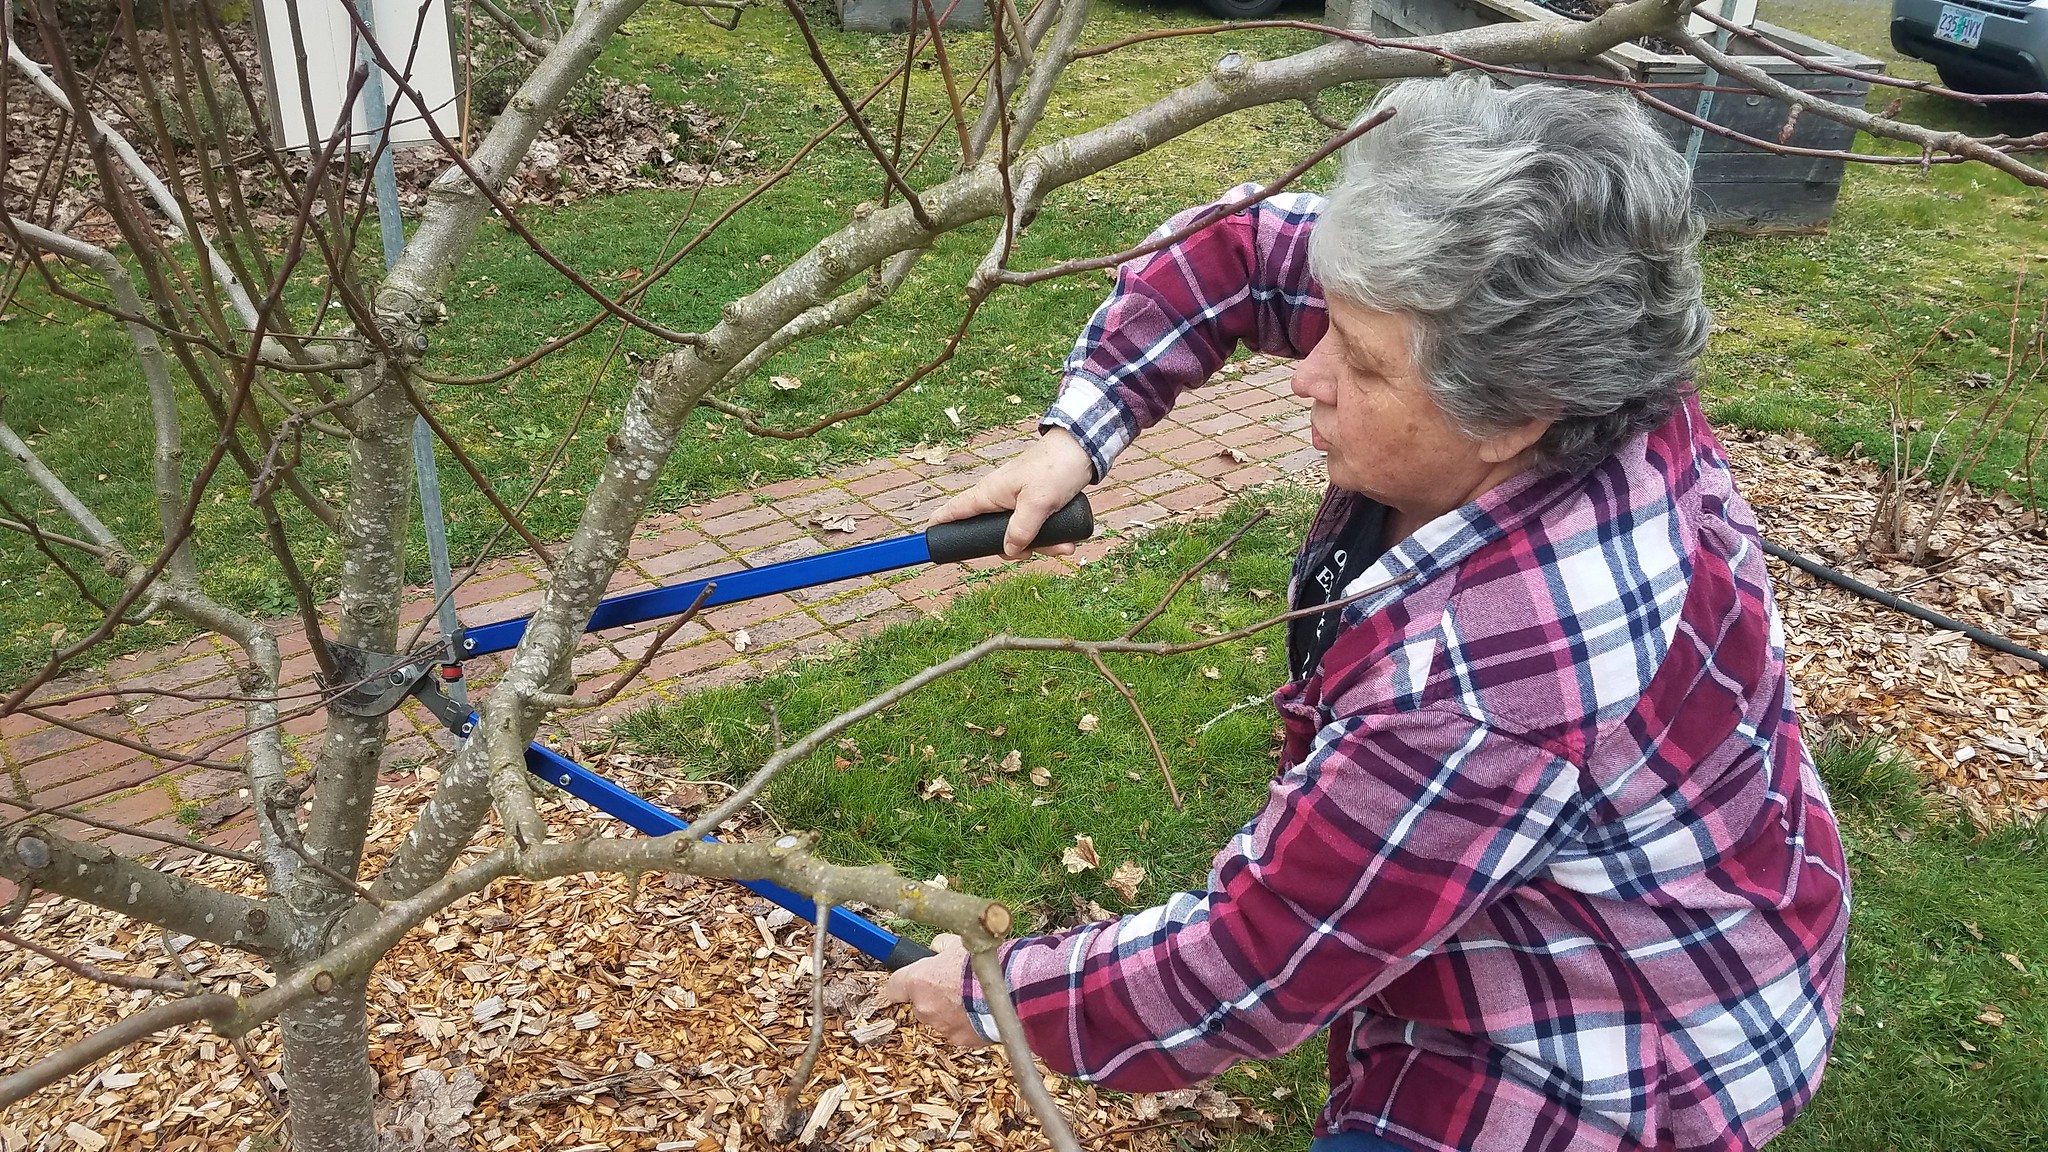 Give overgrown trees a makeover with new OSU pruning video series